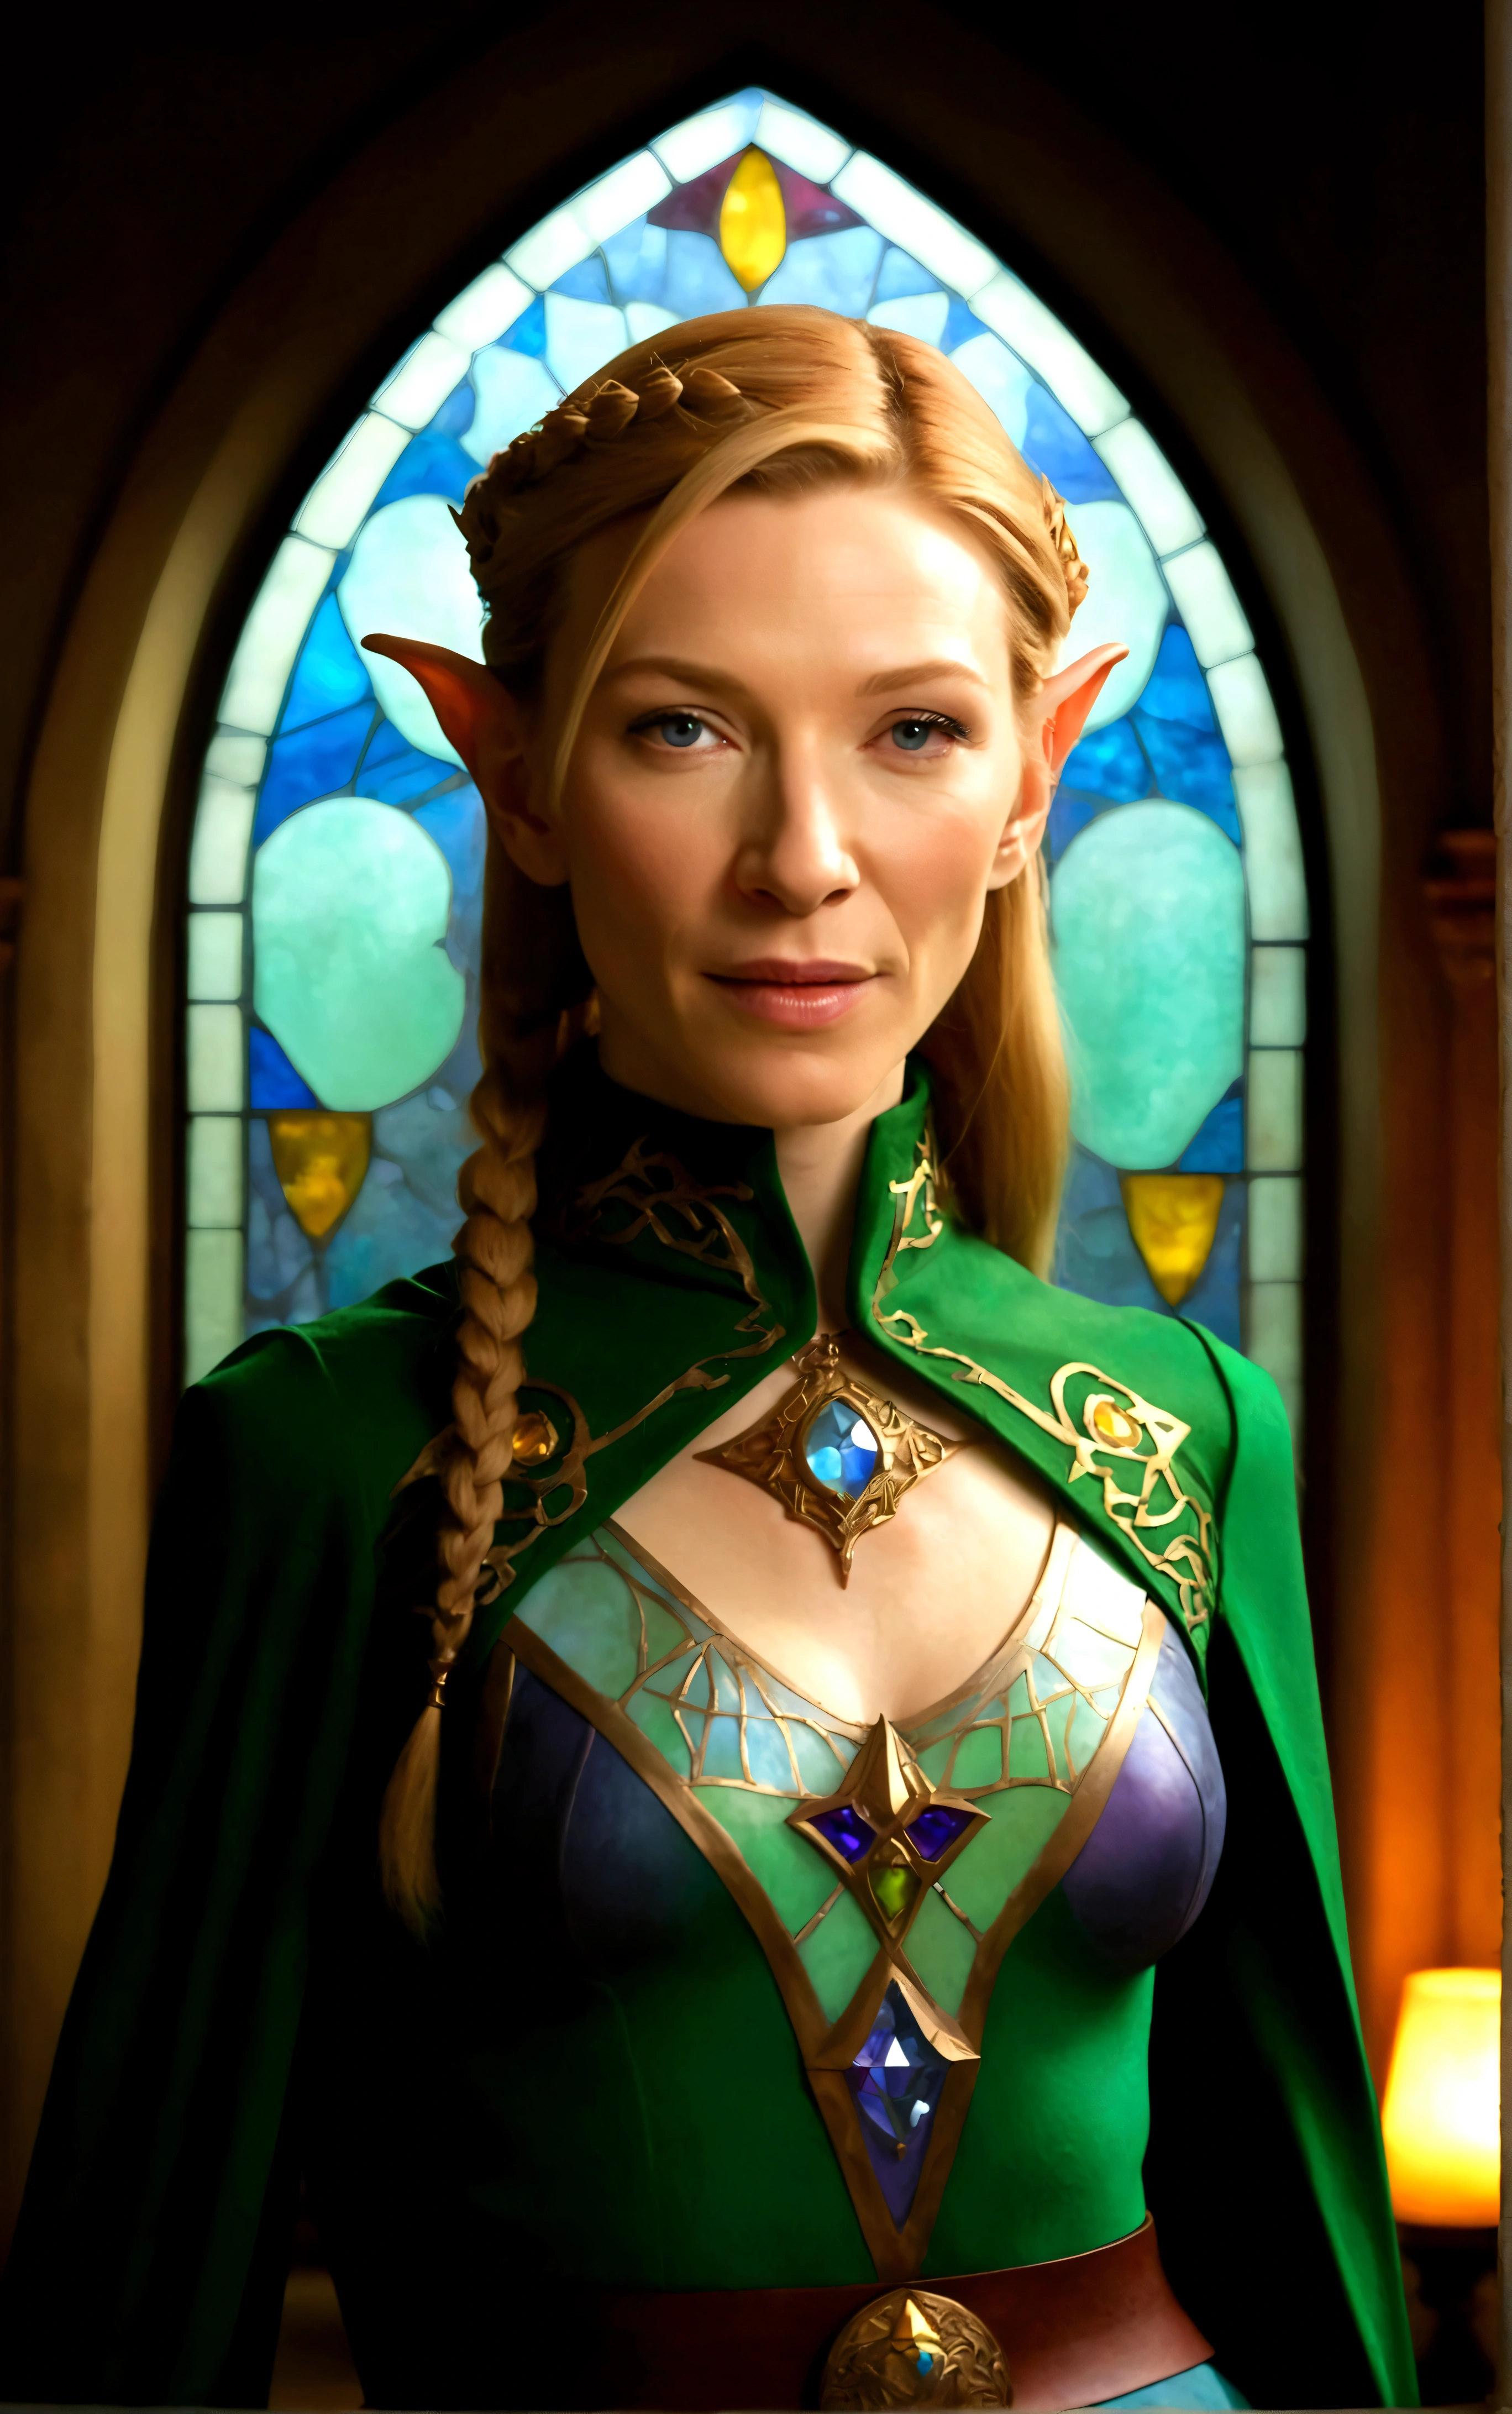 high quality portrait of Cate Blanchett, 25 years old, elf ears, wearing Twilight princess Zelda costume, heroic pose, lavish room with stained glass, extremely detailed face and eyes, intricate costume details, dramatic lighting, photorealistic, vibrant colors, cinematic, fantasy, award-winning digital art